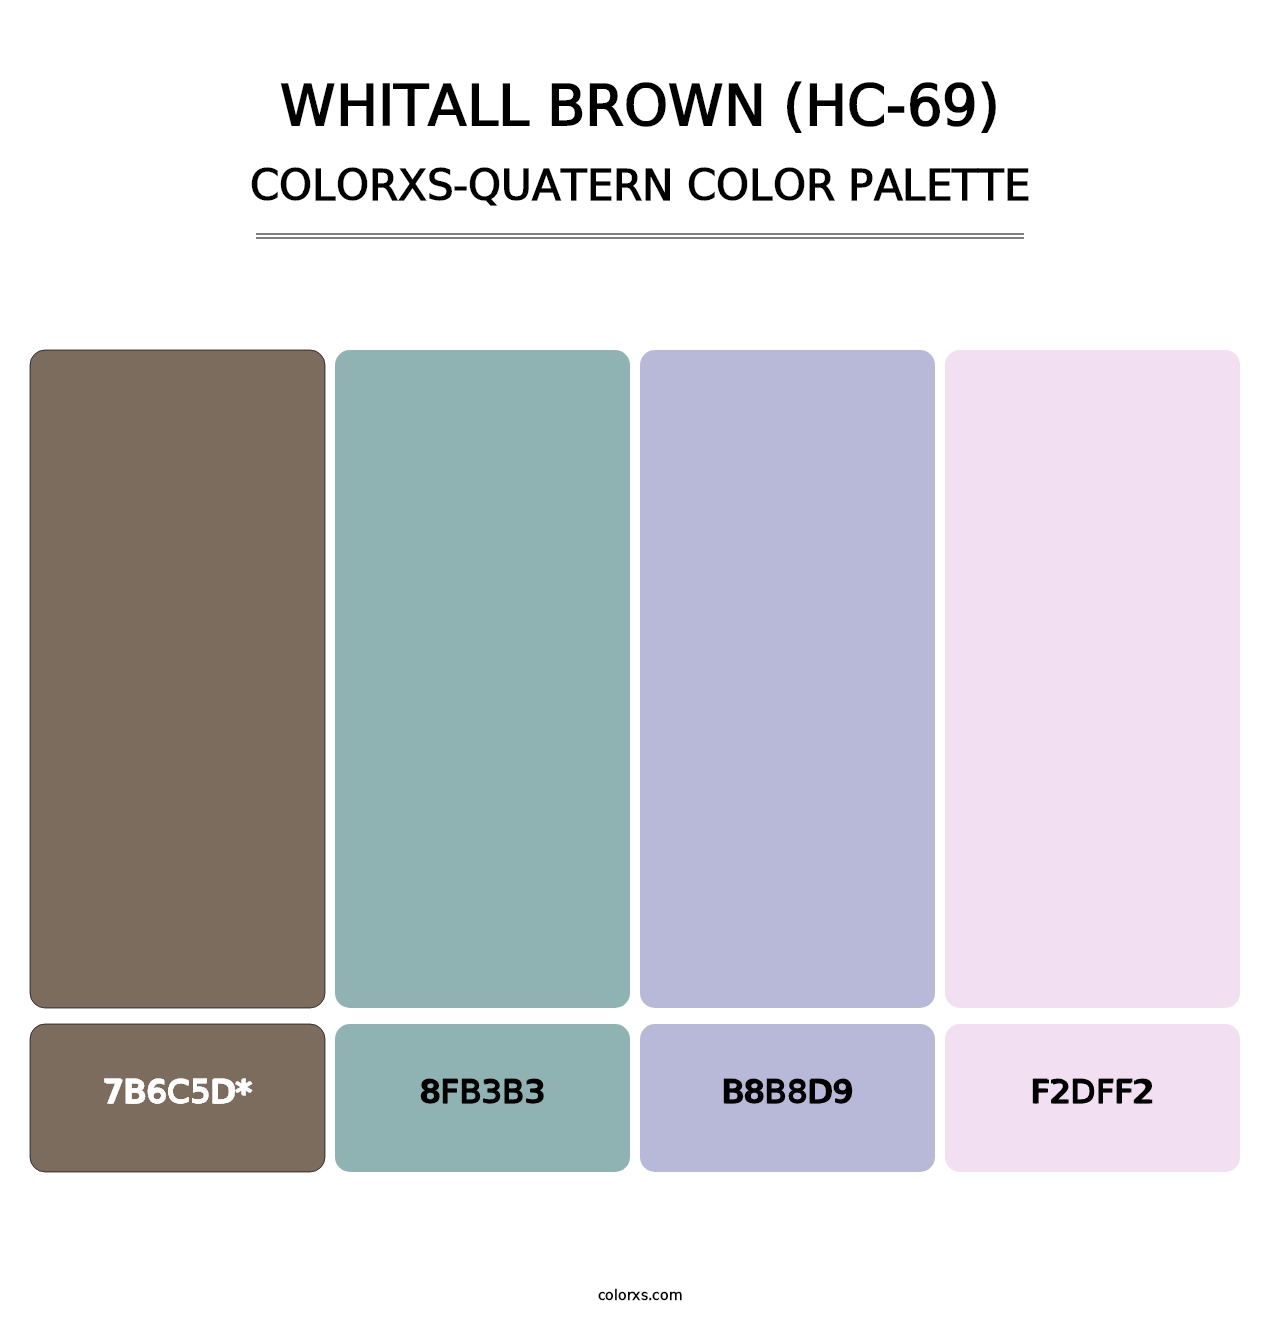 Whitall Brown (HC-69) - Colorxs Quad Palette